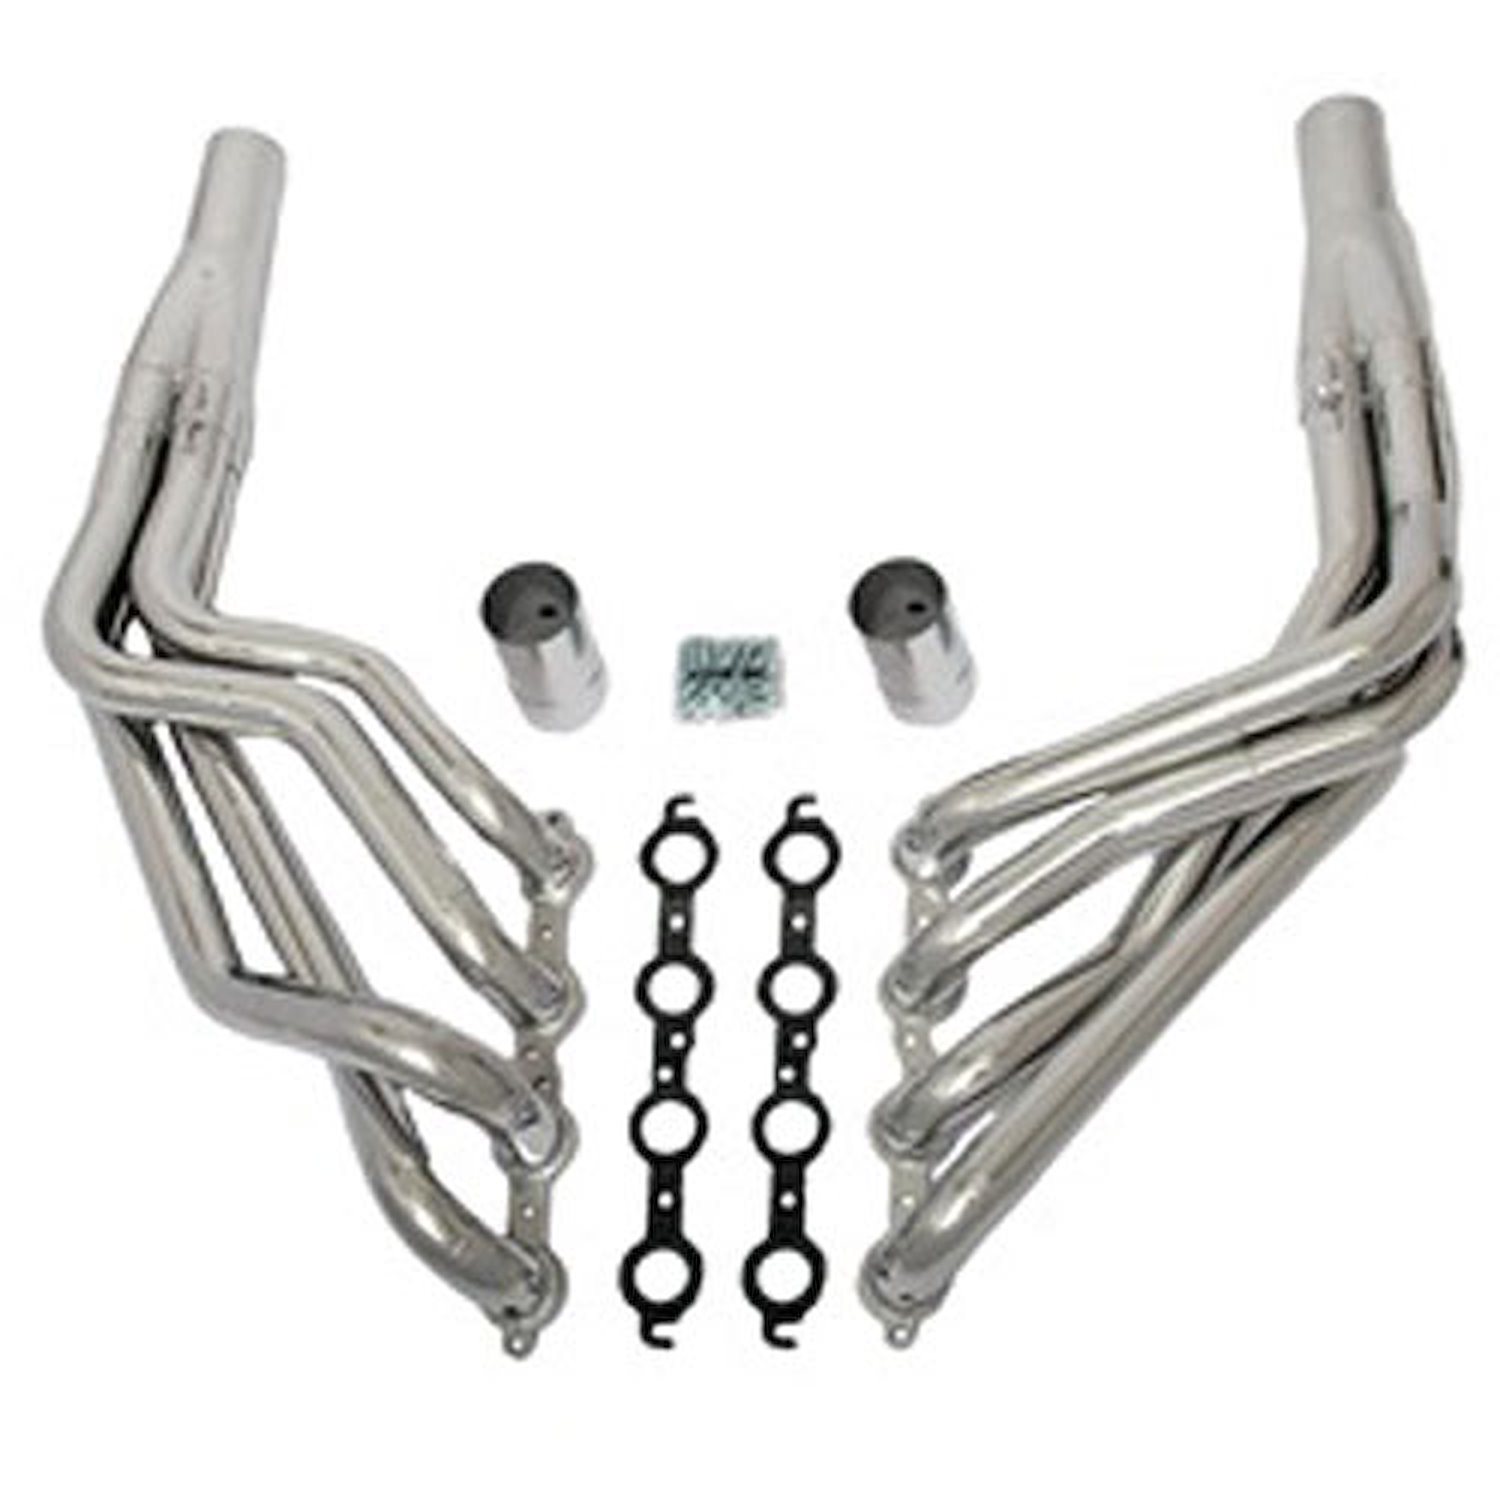 GM LS Engine Swap Long-Tube Headers for 1994-2003 Chevy S10/Blazer [Uncoated]